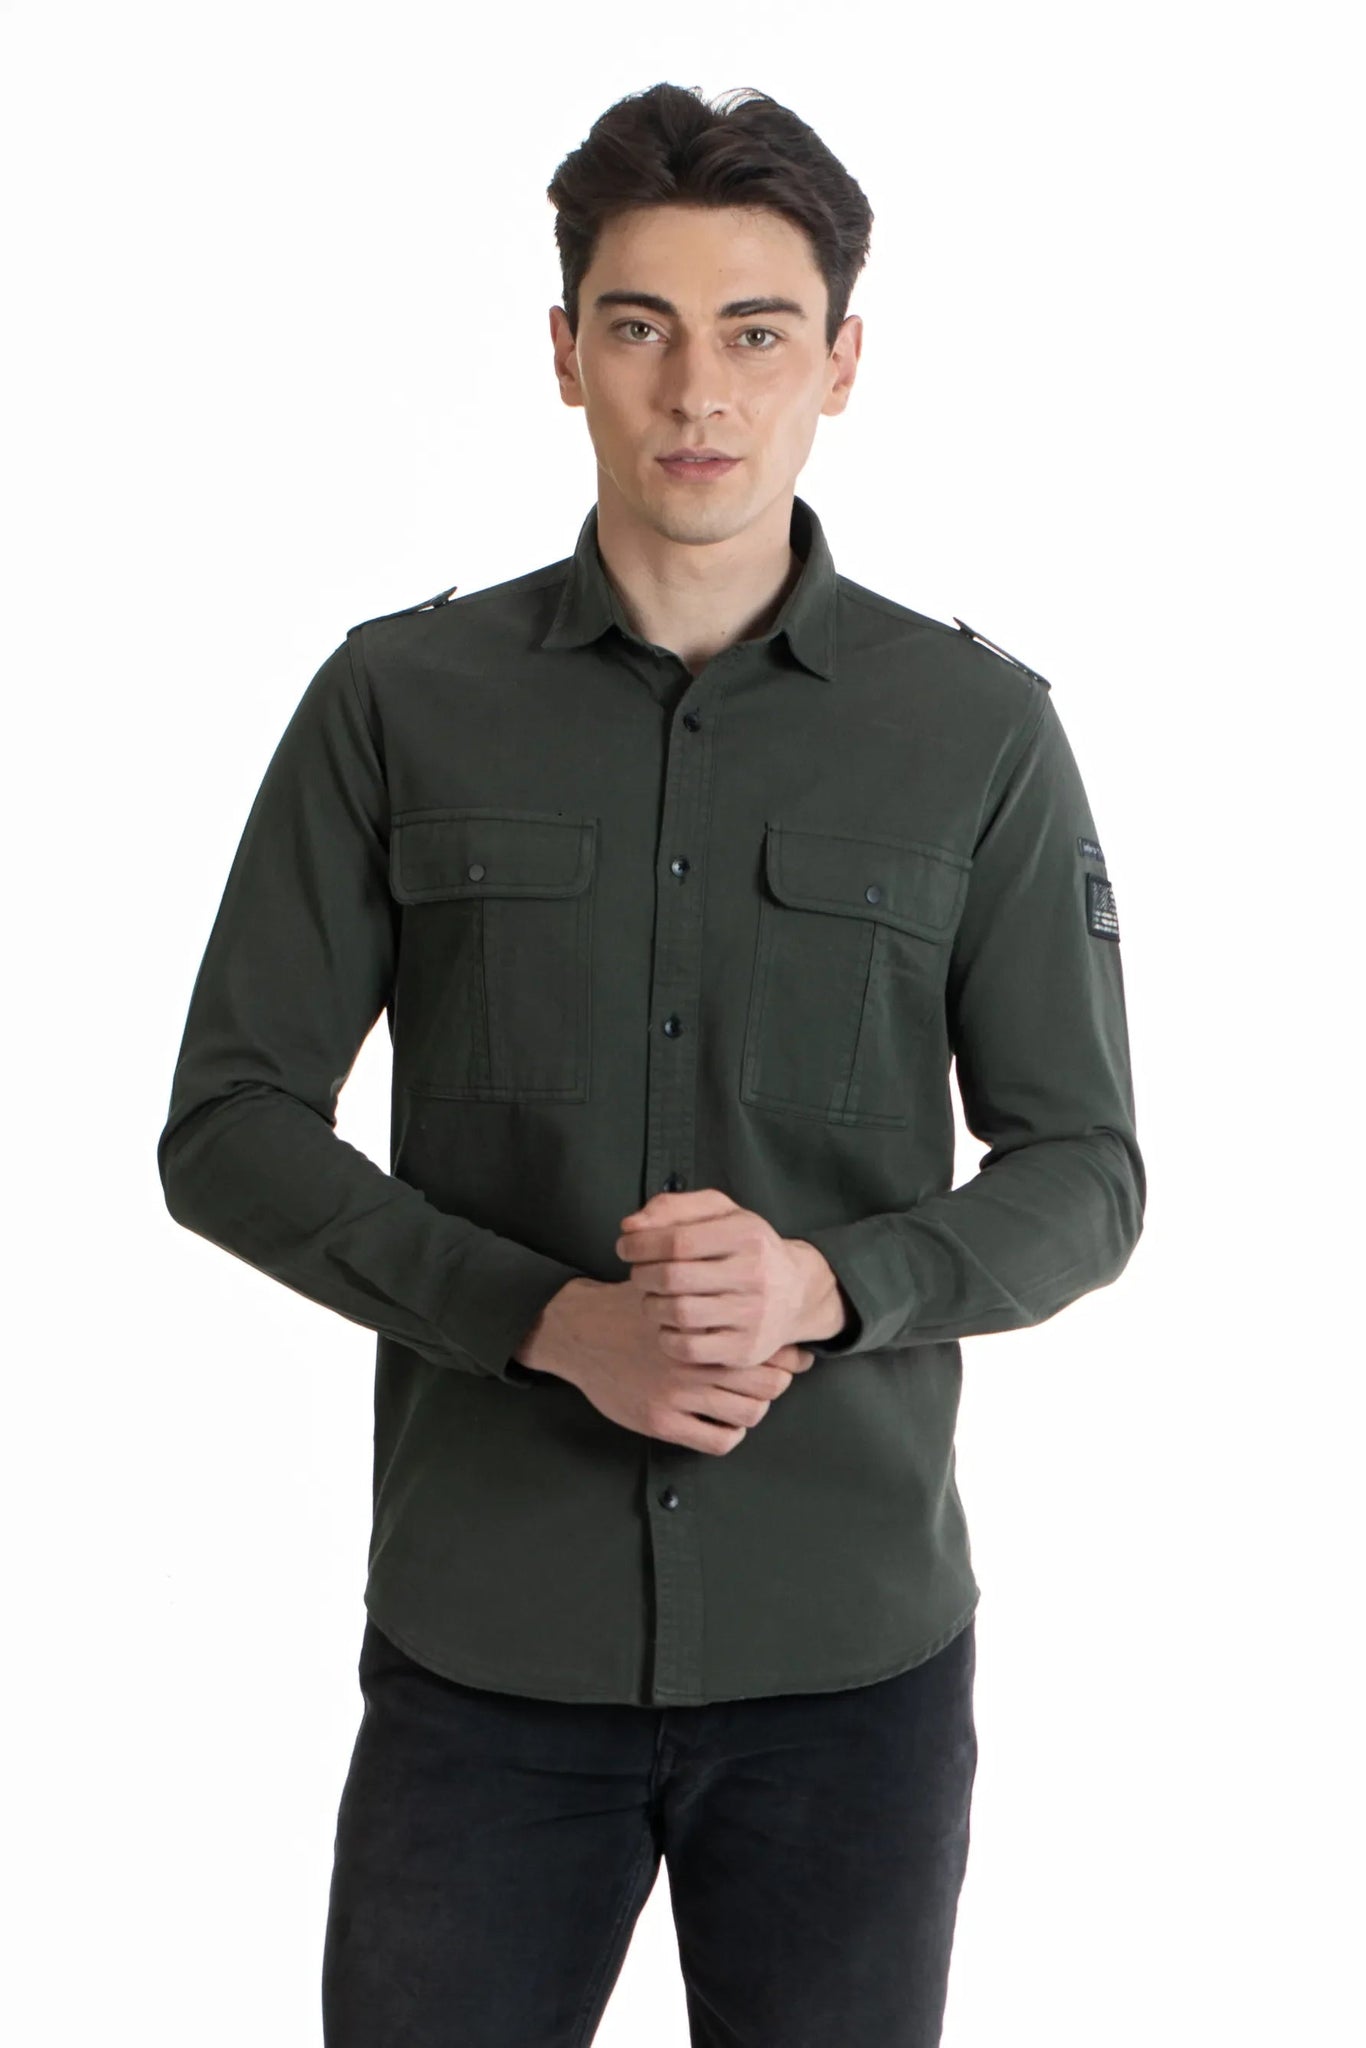 Buy Cavalry Twill Tactical Shirt Online.